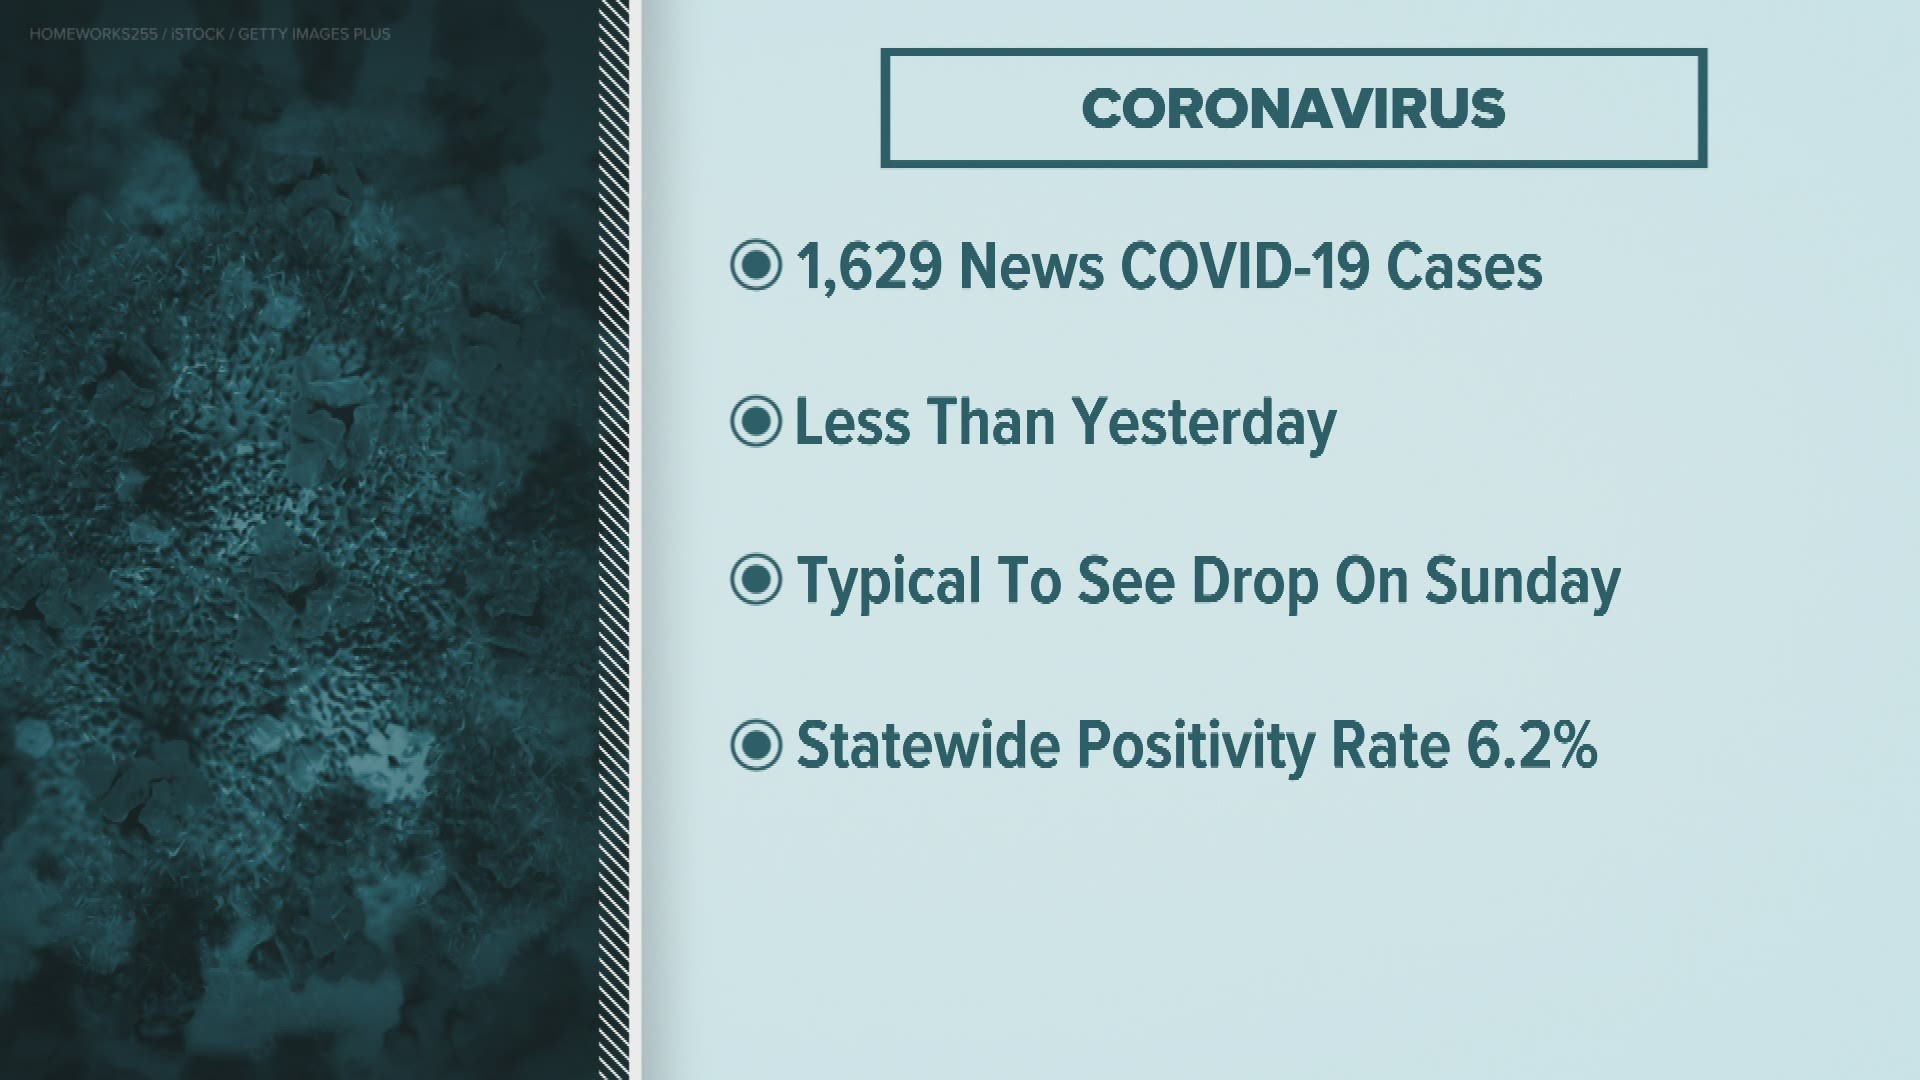 Health leaders are reporting another 1,600 new COVID-19 cases Sunday.